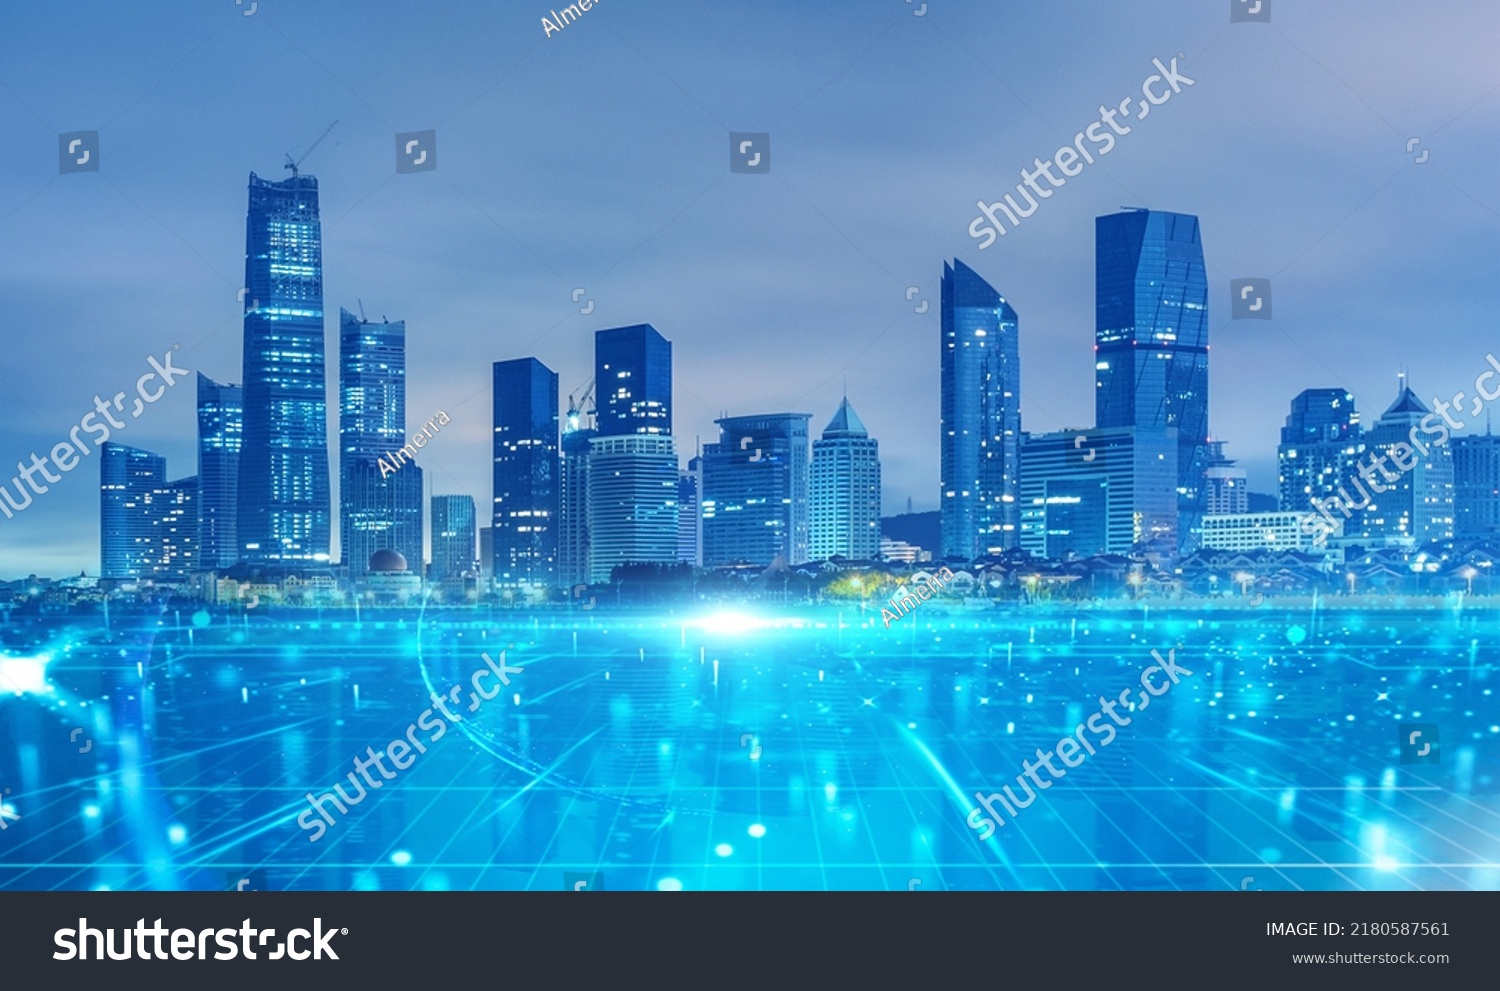 Panoramic urban architecture, cityscape with space and neon light effects. Modern hi-tech, science, futuristic technology concept. Abstract digital high-tech city design for banner background #2180587561